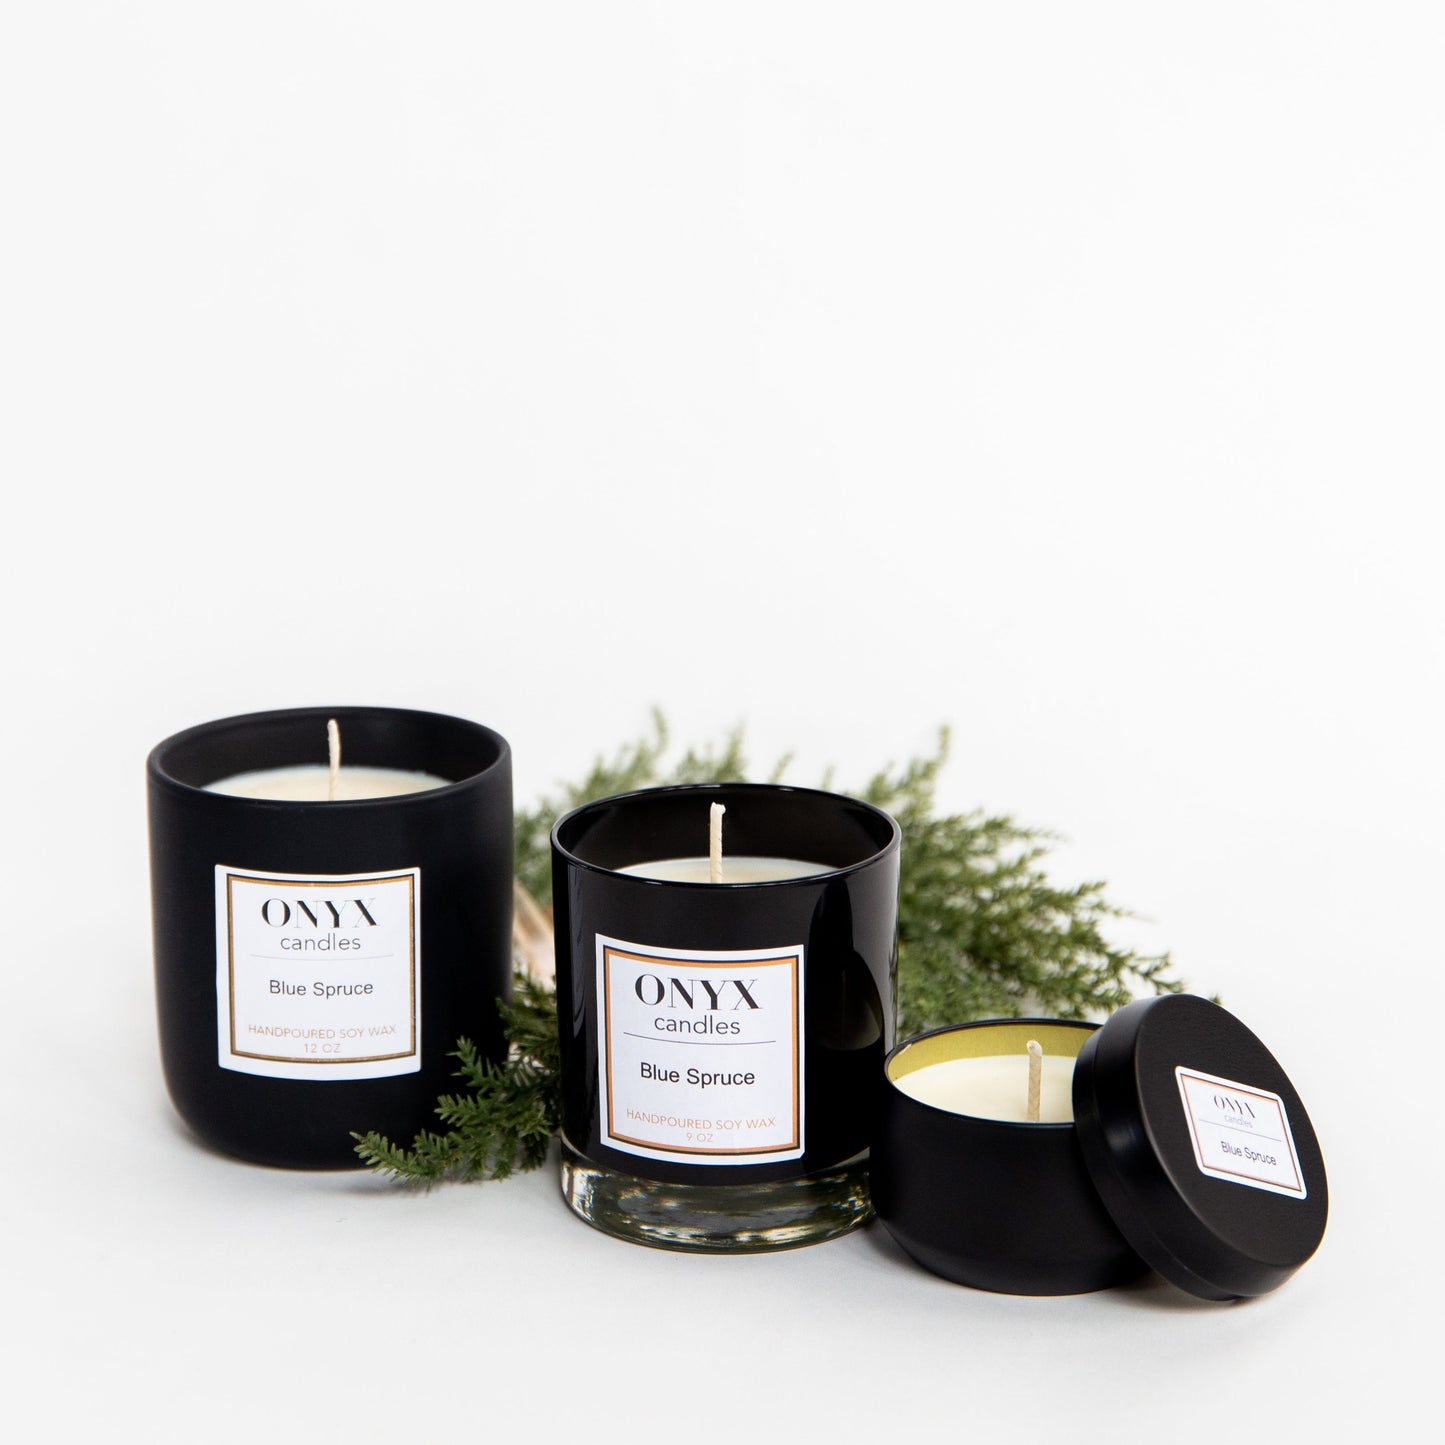 Pictured here are three size varieties for Onyx candles, scented Blue Spruce.